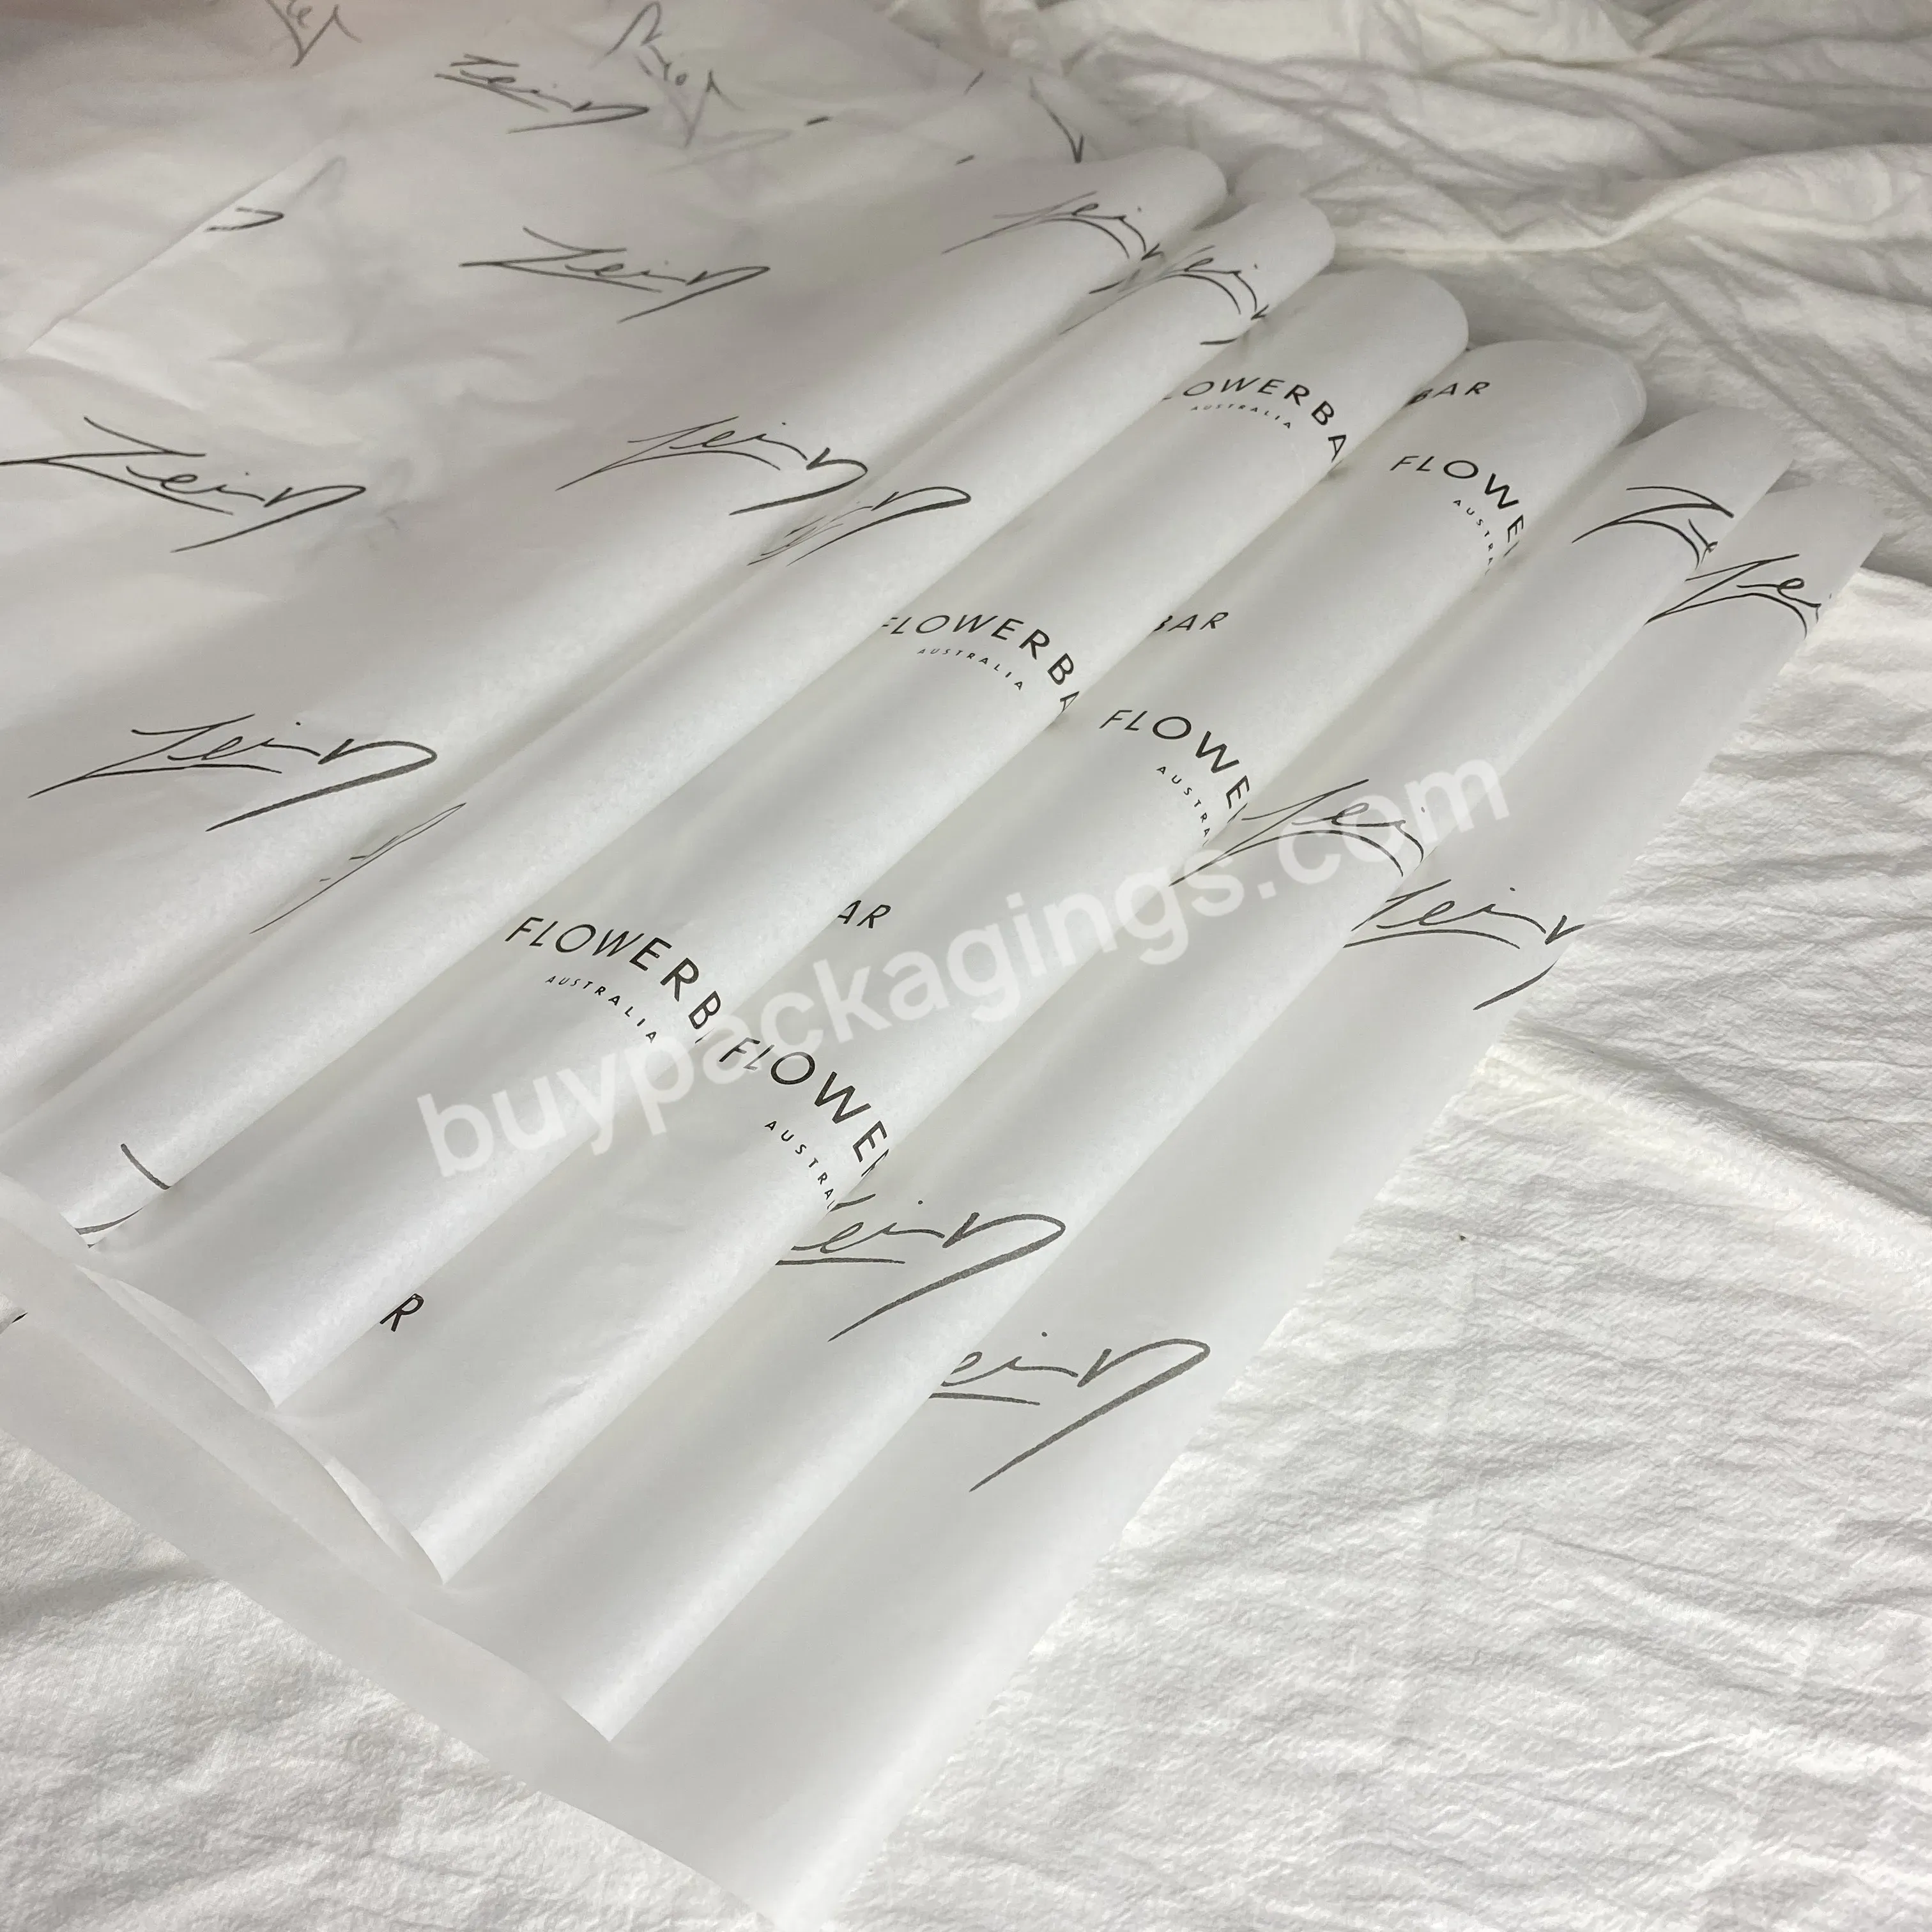 Black Raw Wrapping Paper Smoking Gift Wrap Paper Glassine Flower Paper Wrapping Waterproof For Your Packaging And Promotions - Buy Raw Wrapping Paper Smoking,Gift Wrap Paper Glassine,Flower Paper Wrapping Waterproof.